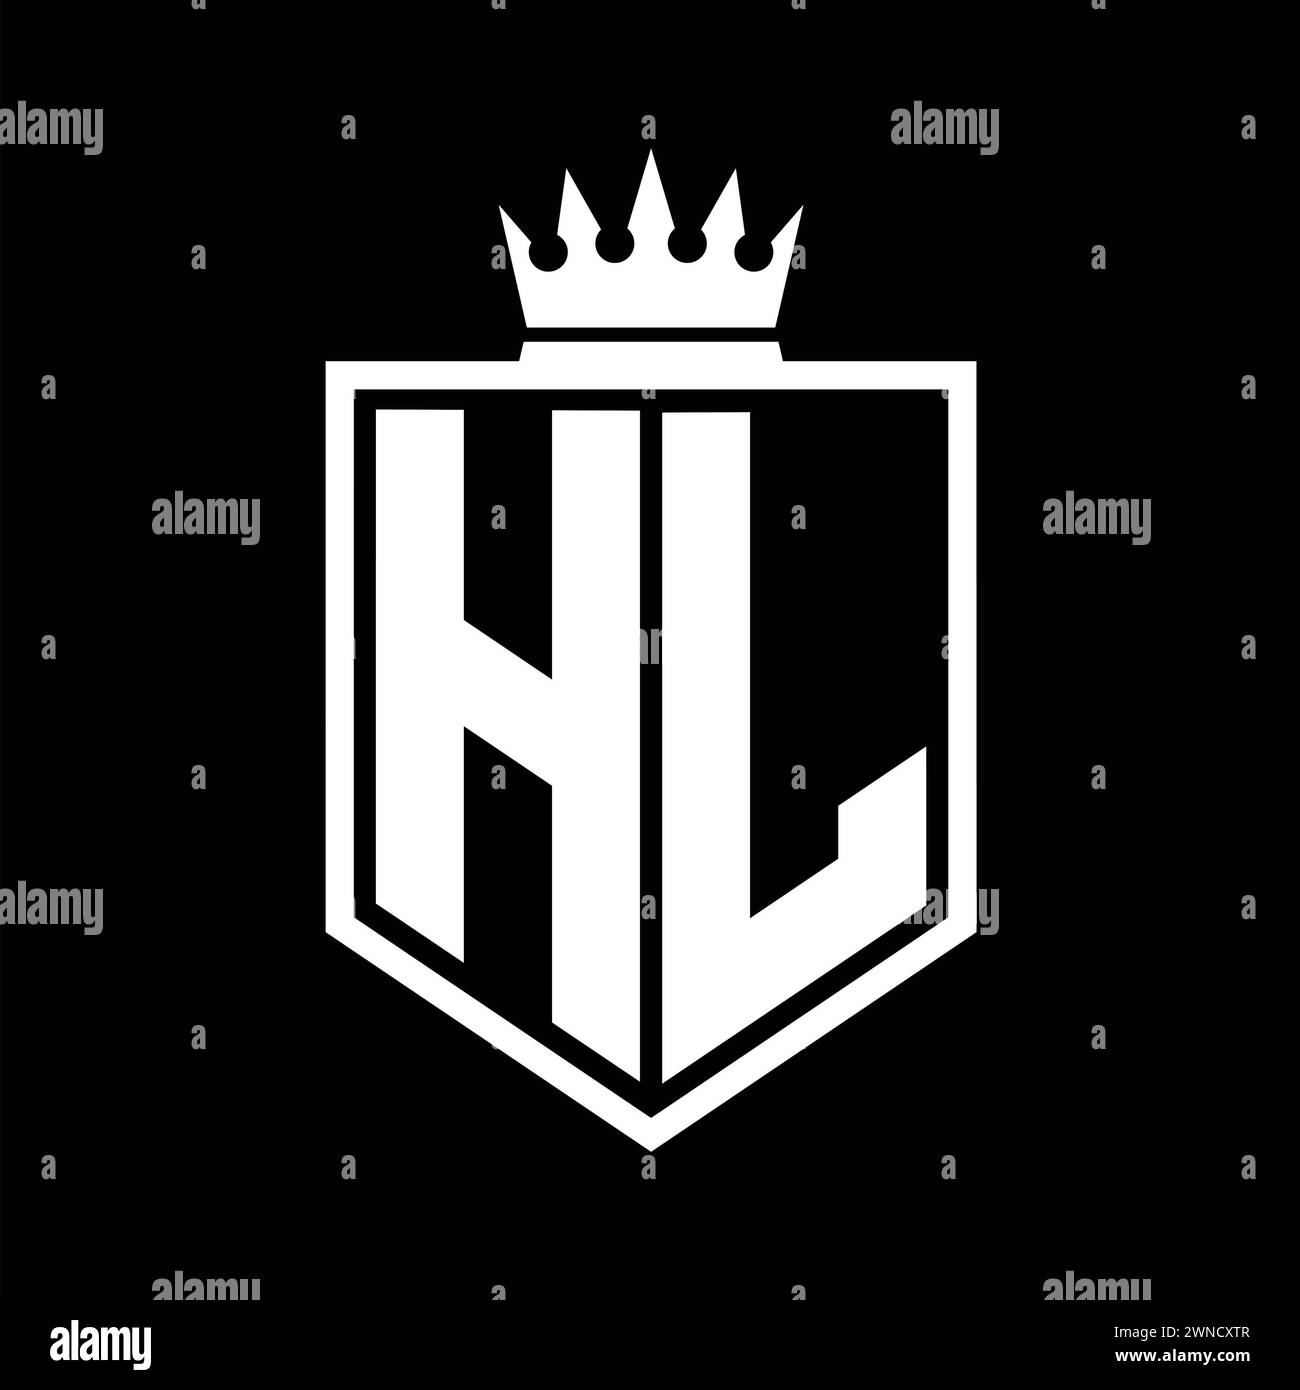 HL Letter Logo monogram bold shield geometric shape with crown outline black and white style design template Stock Photo